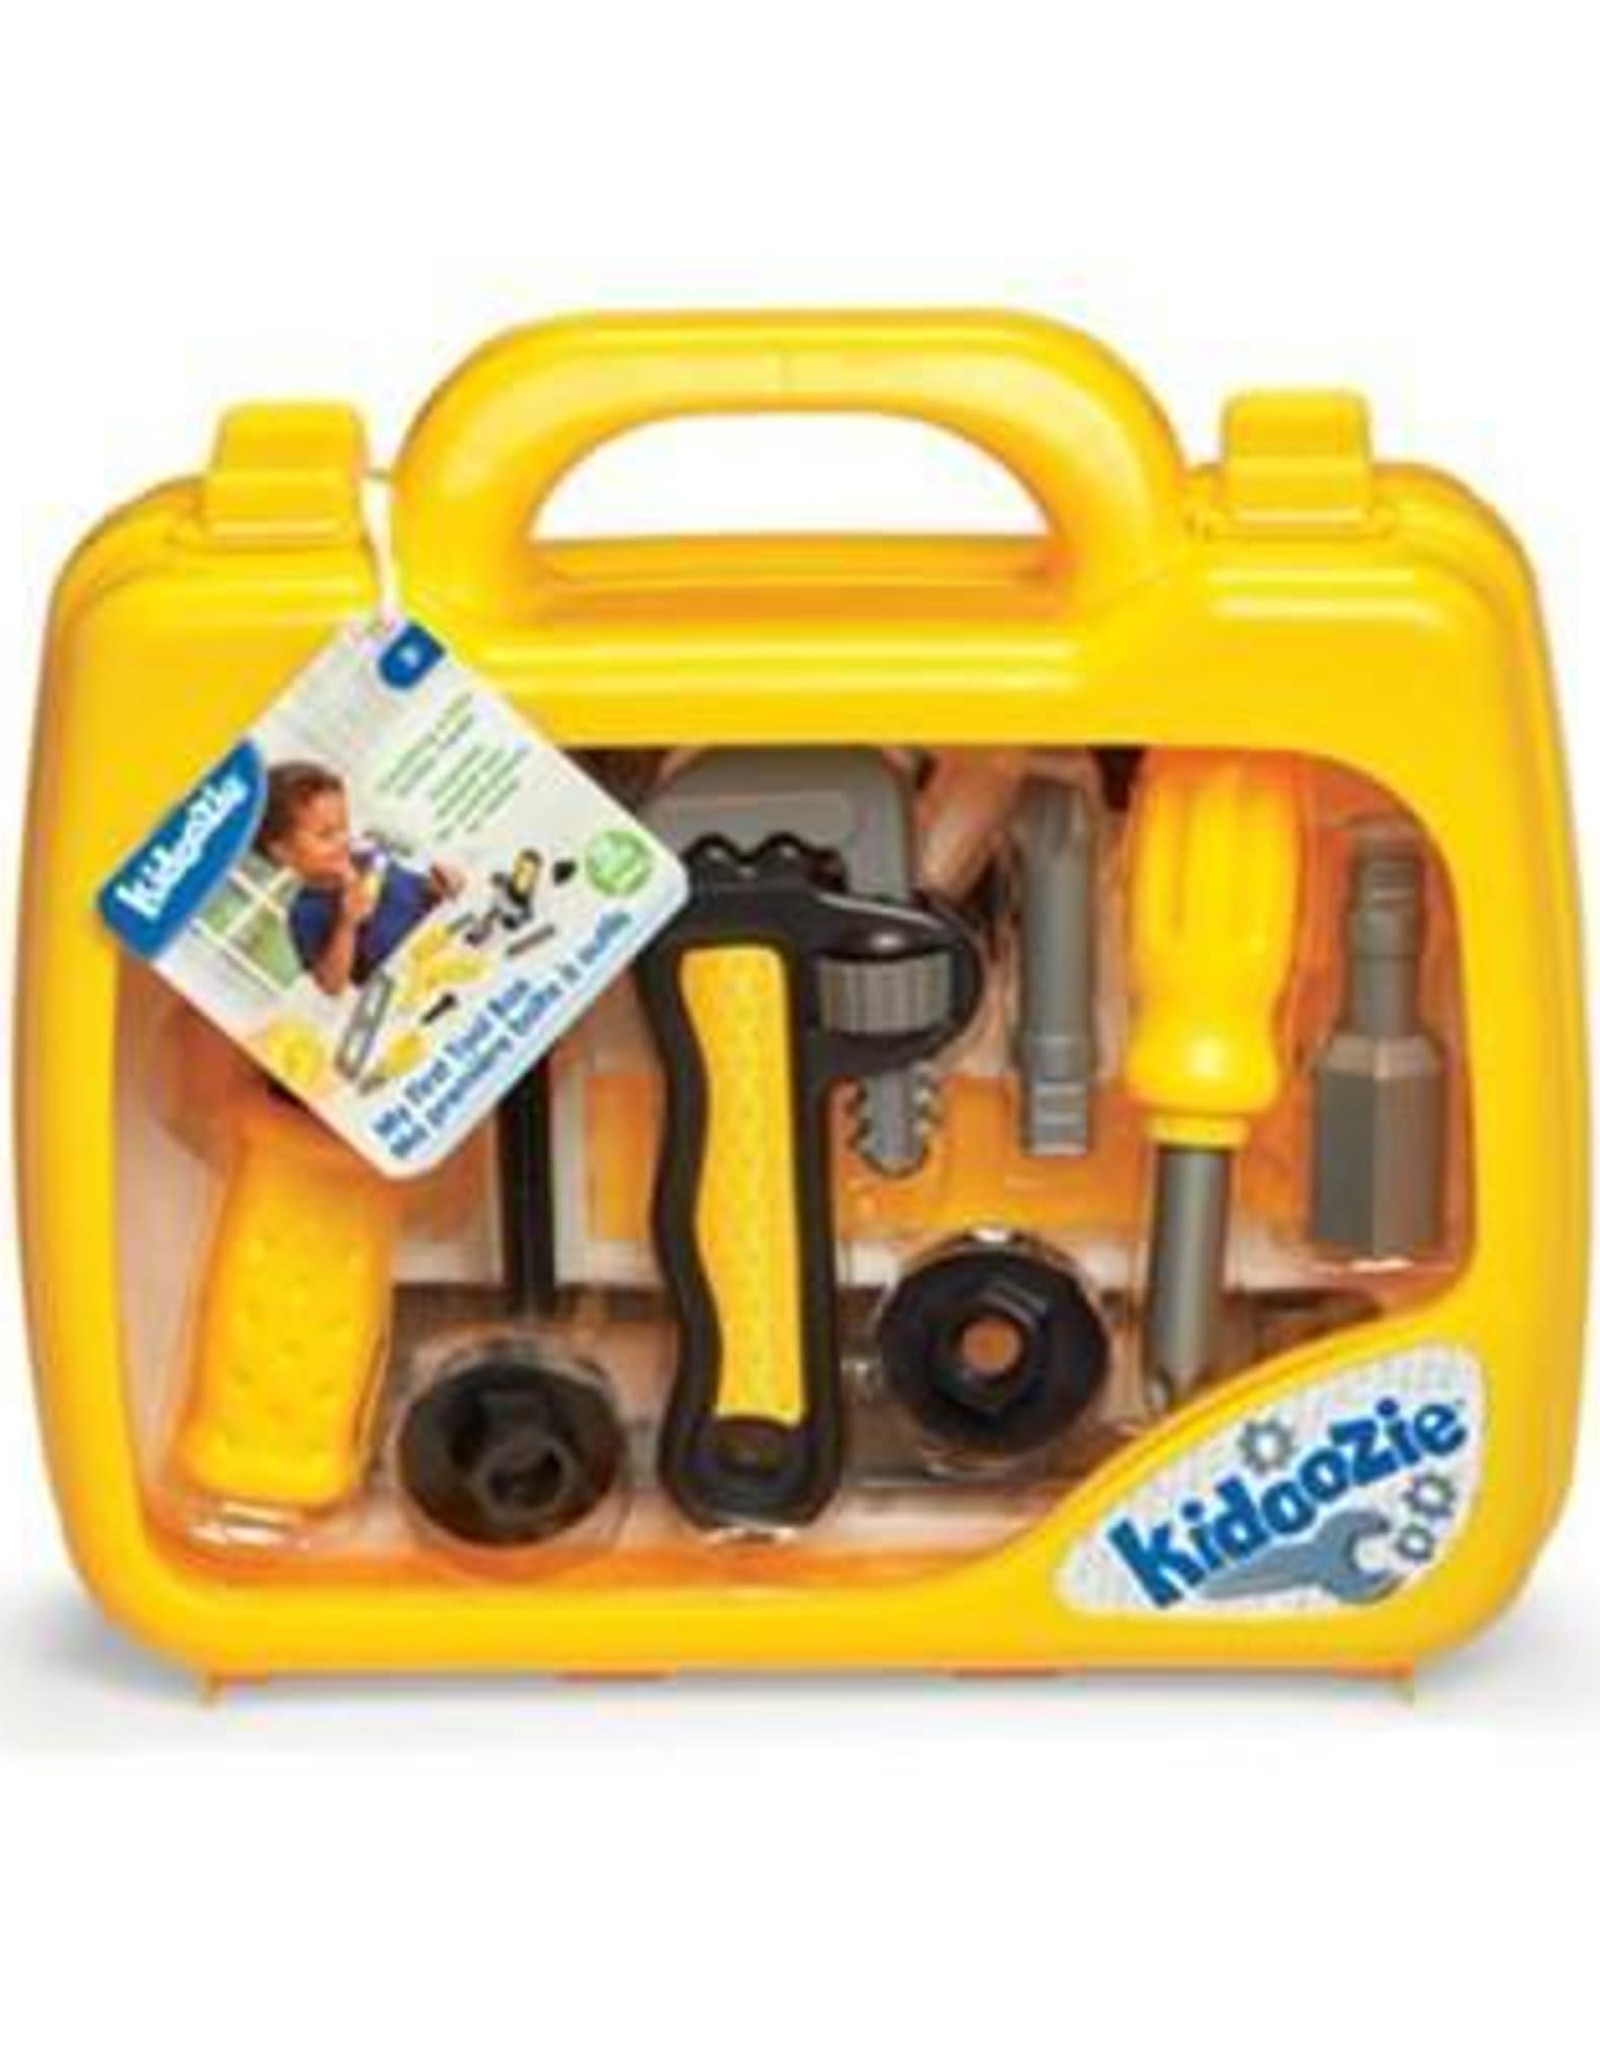 Kidoozie My First Toolbox